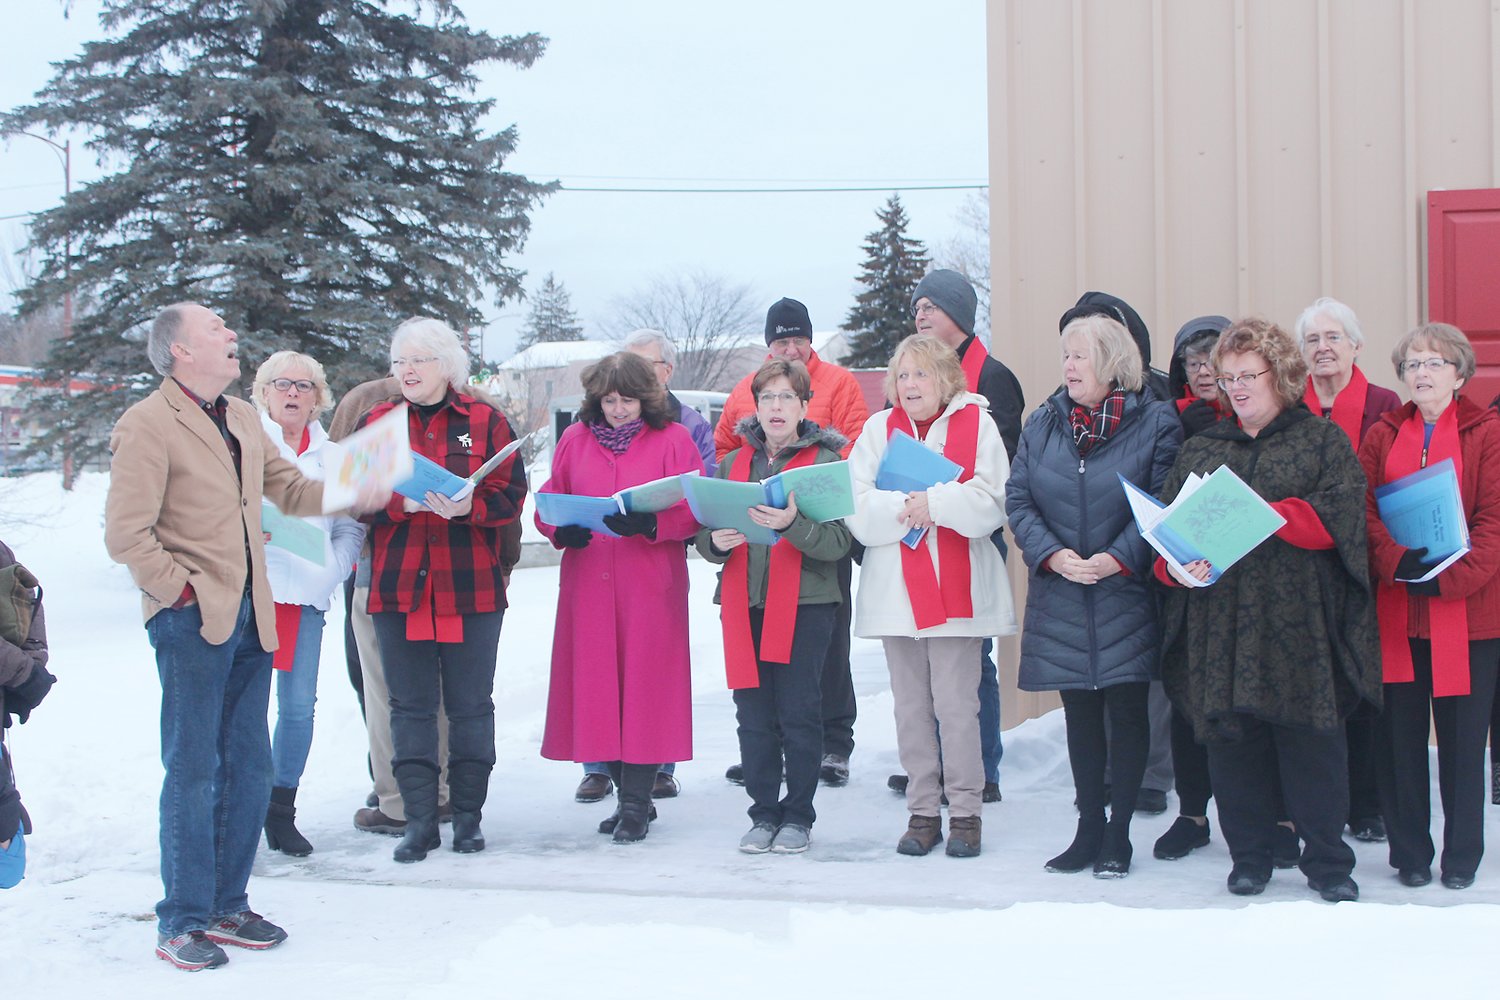 The Tower-Soudan Singers will carol at the Lights of Love event in Tower.